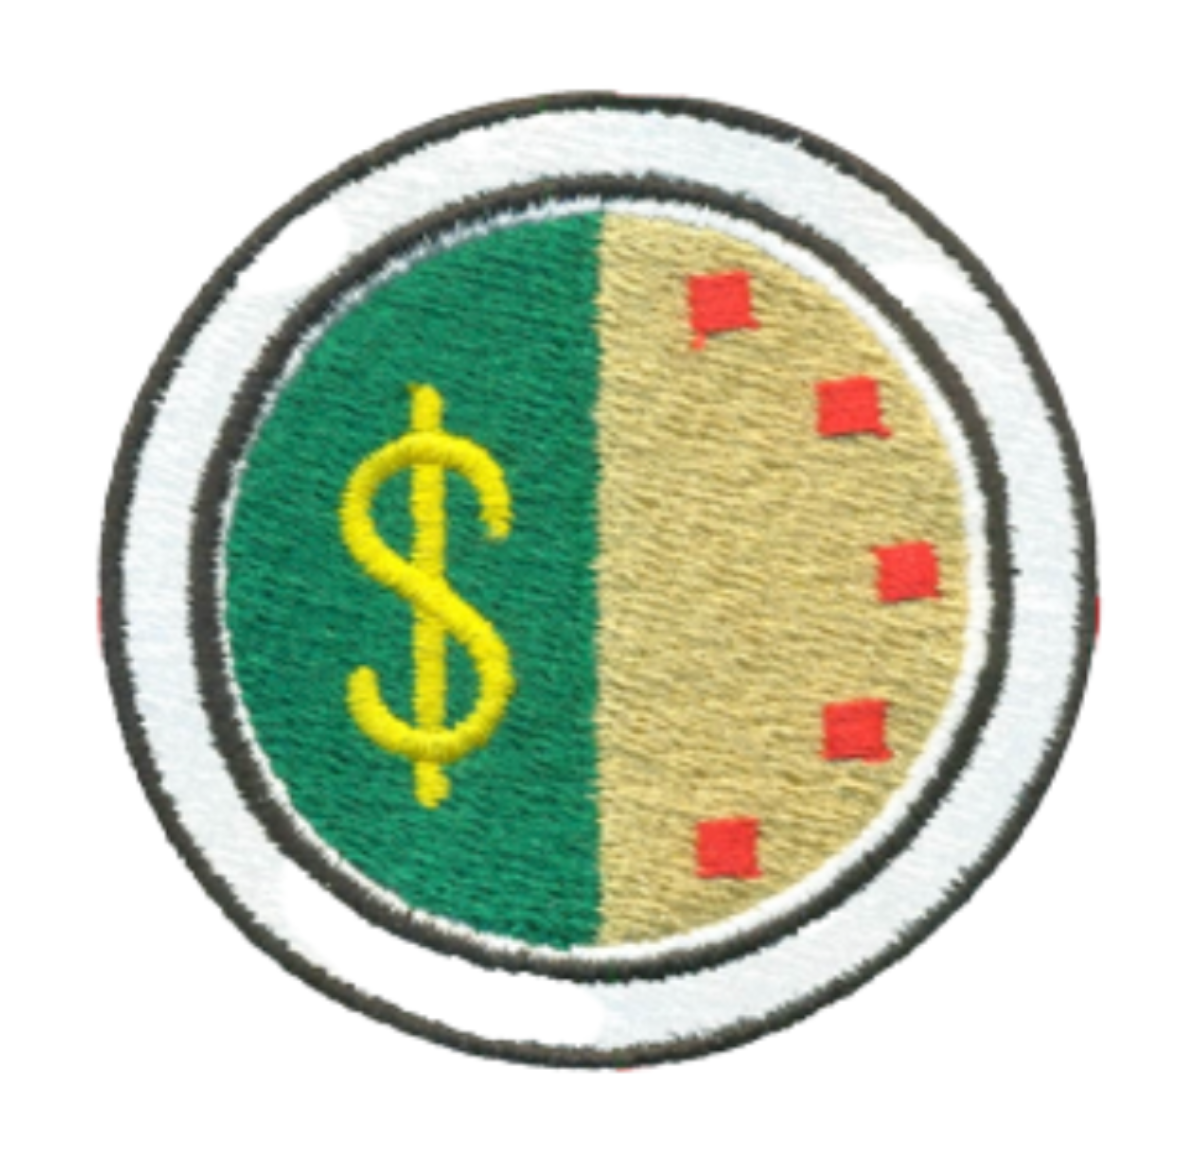 Boy Scouts of America Personal Management 2.25" x 2.25" Patch